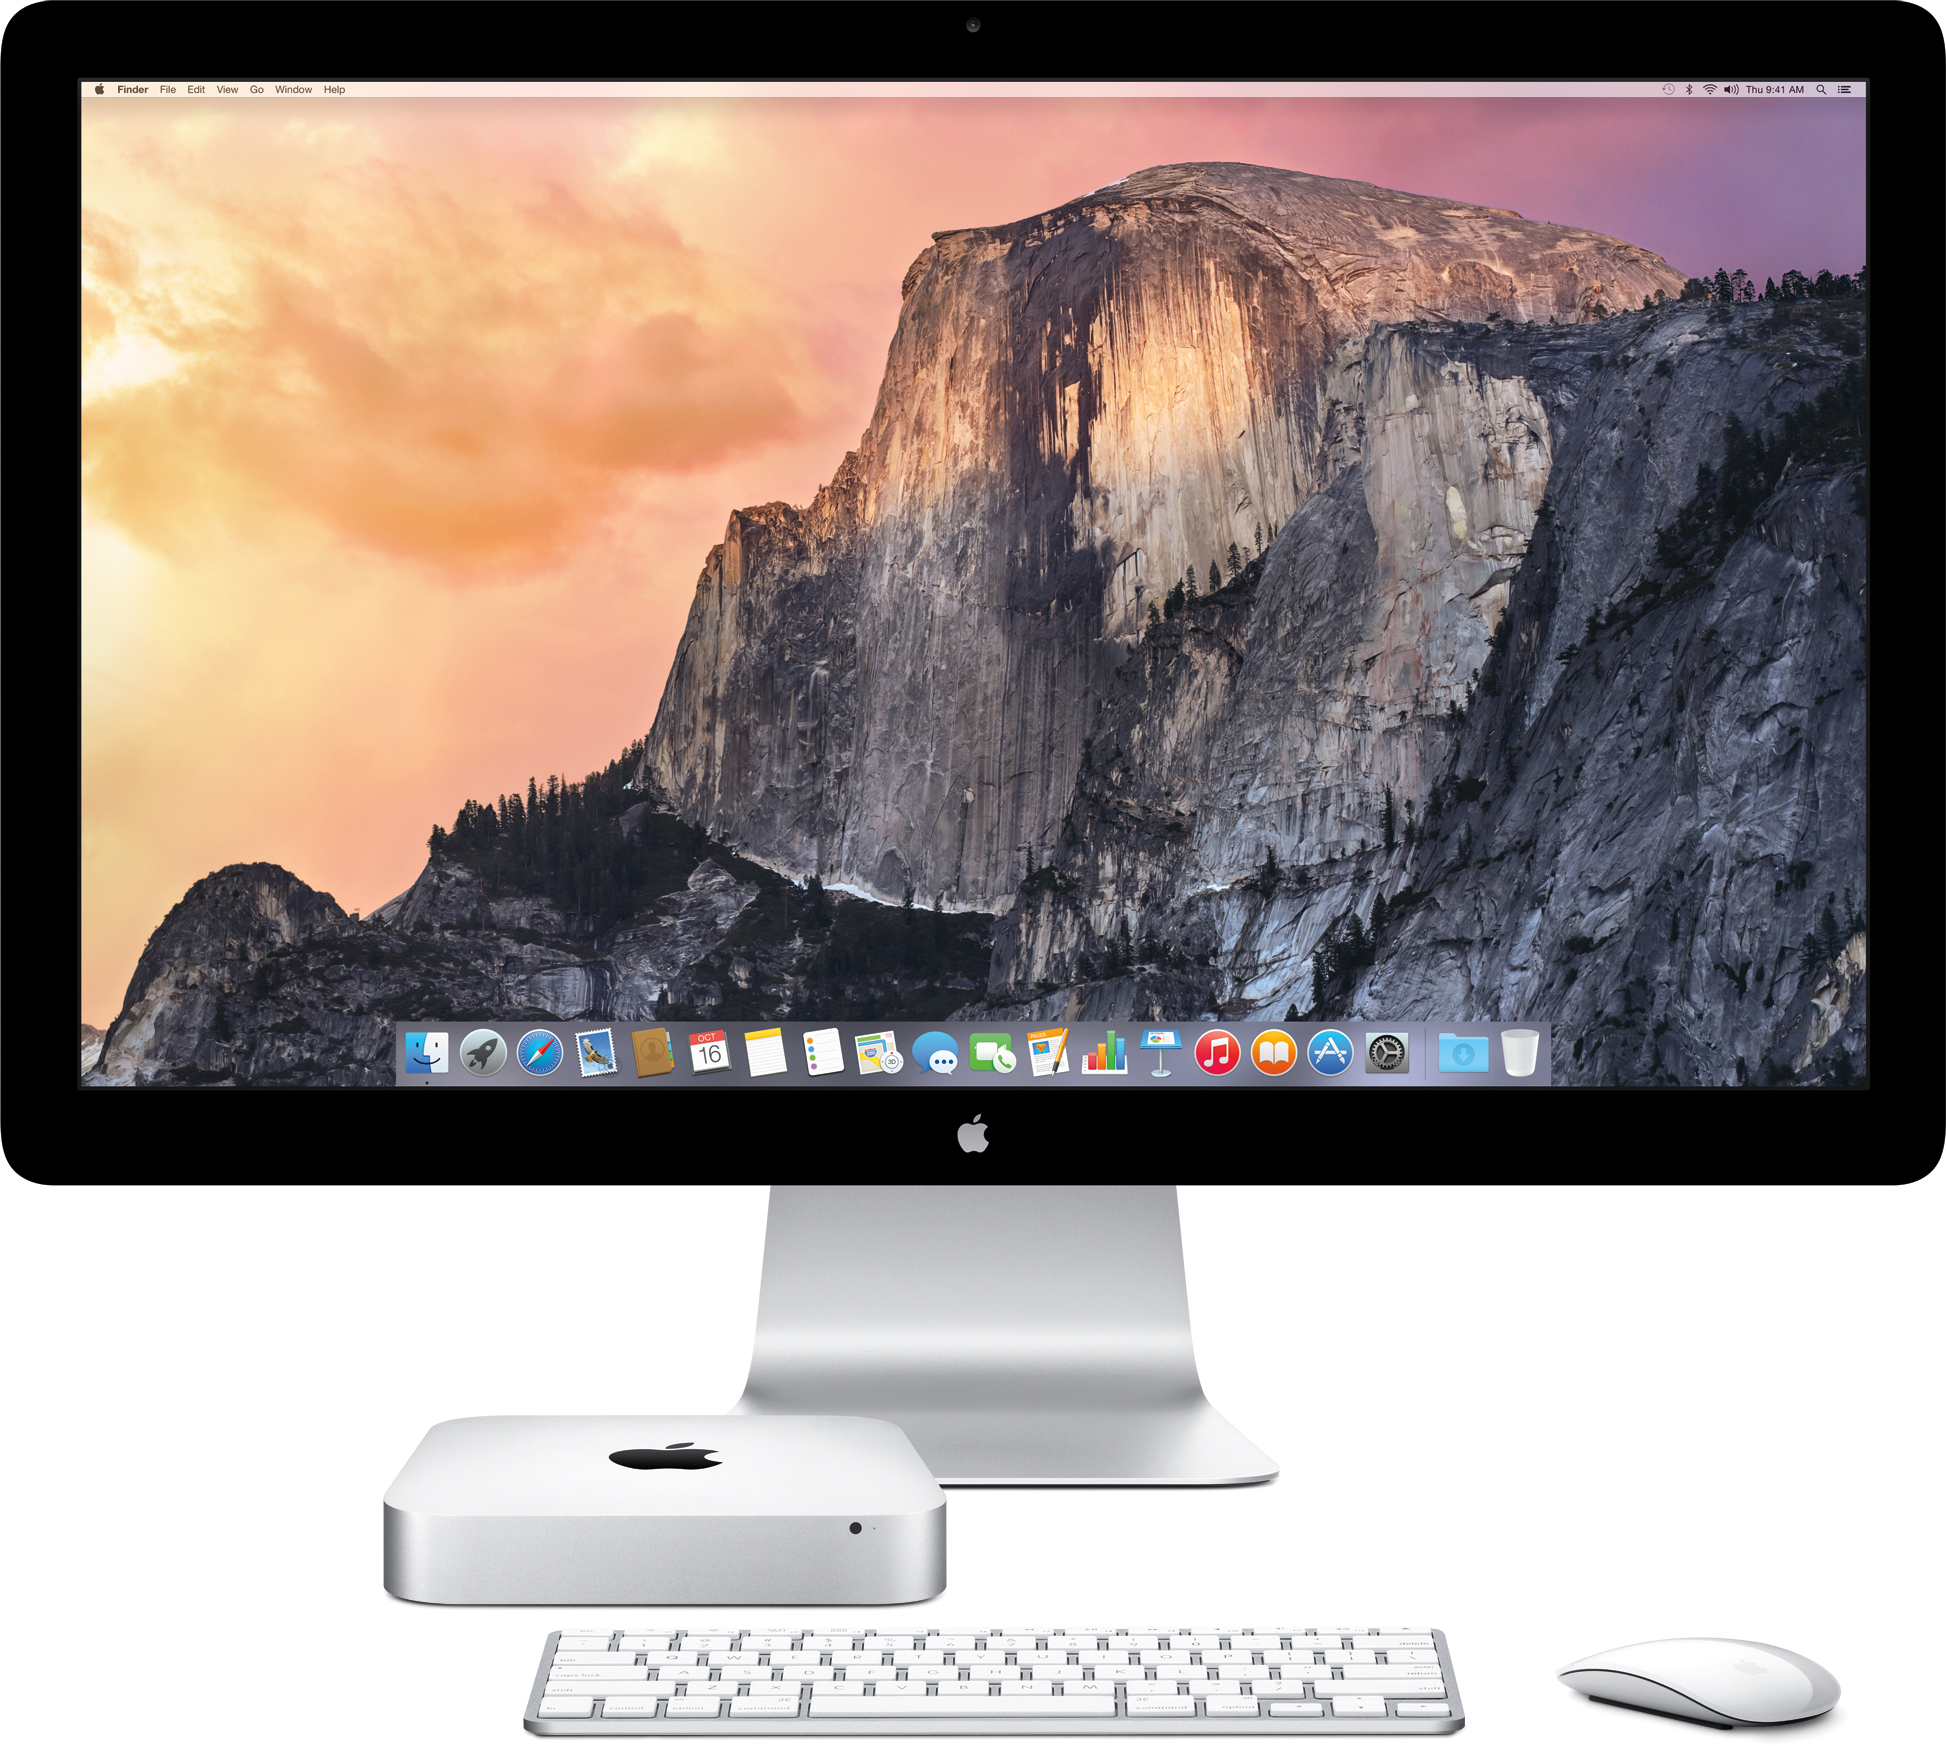 New front facing mini Mac with Thunderbolt Display, keyboard and mouse